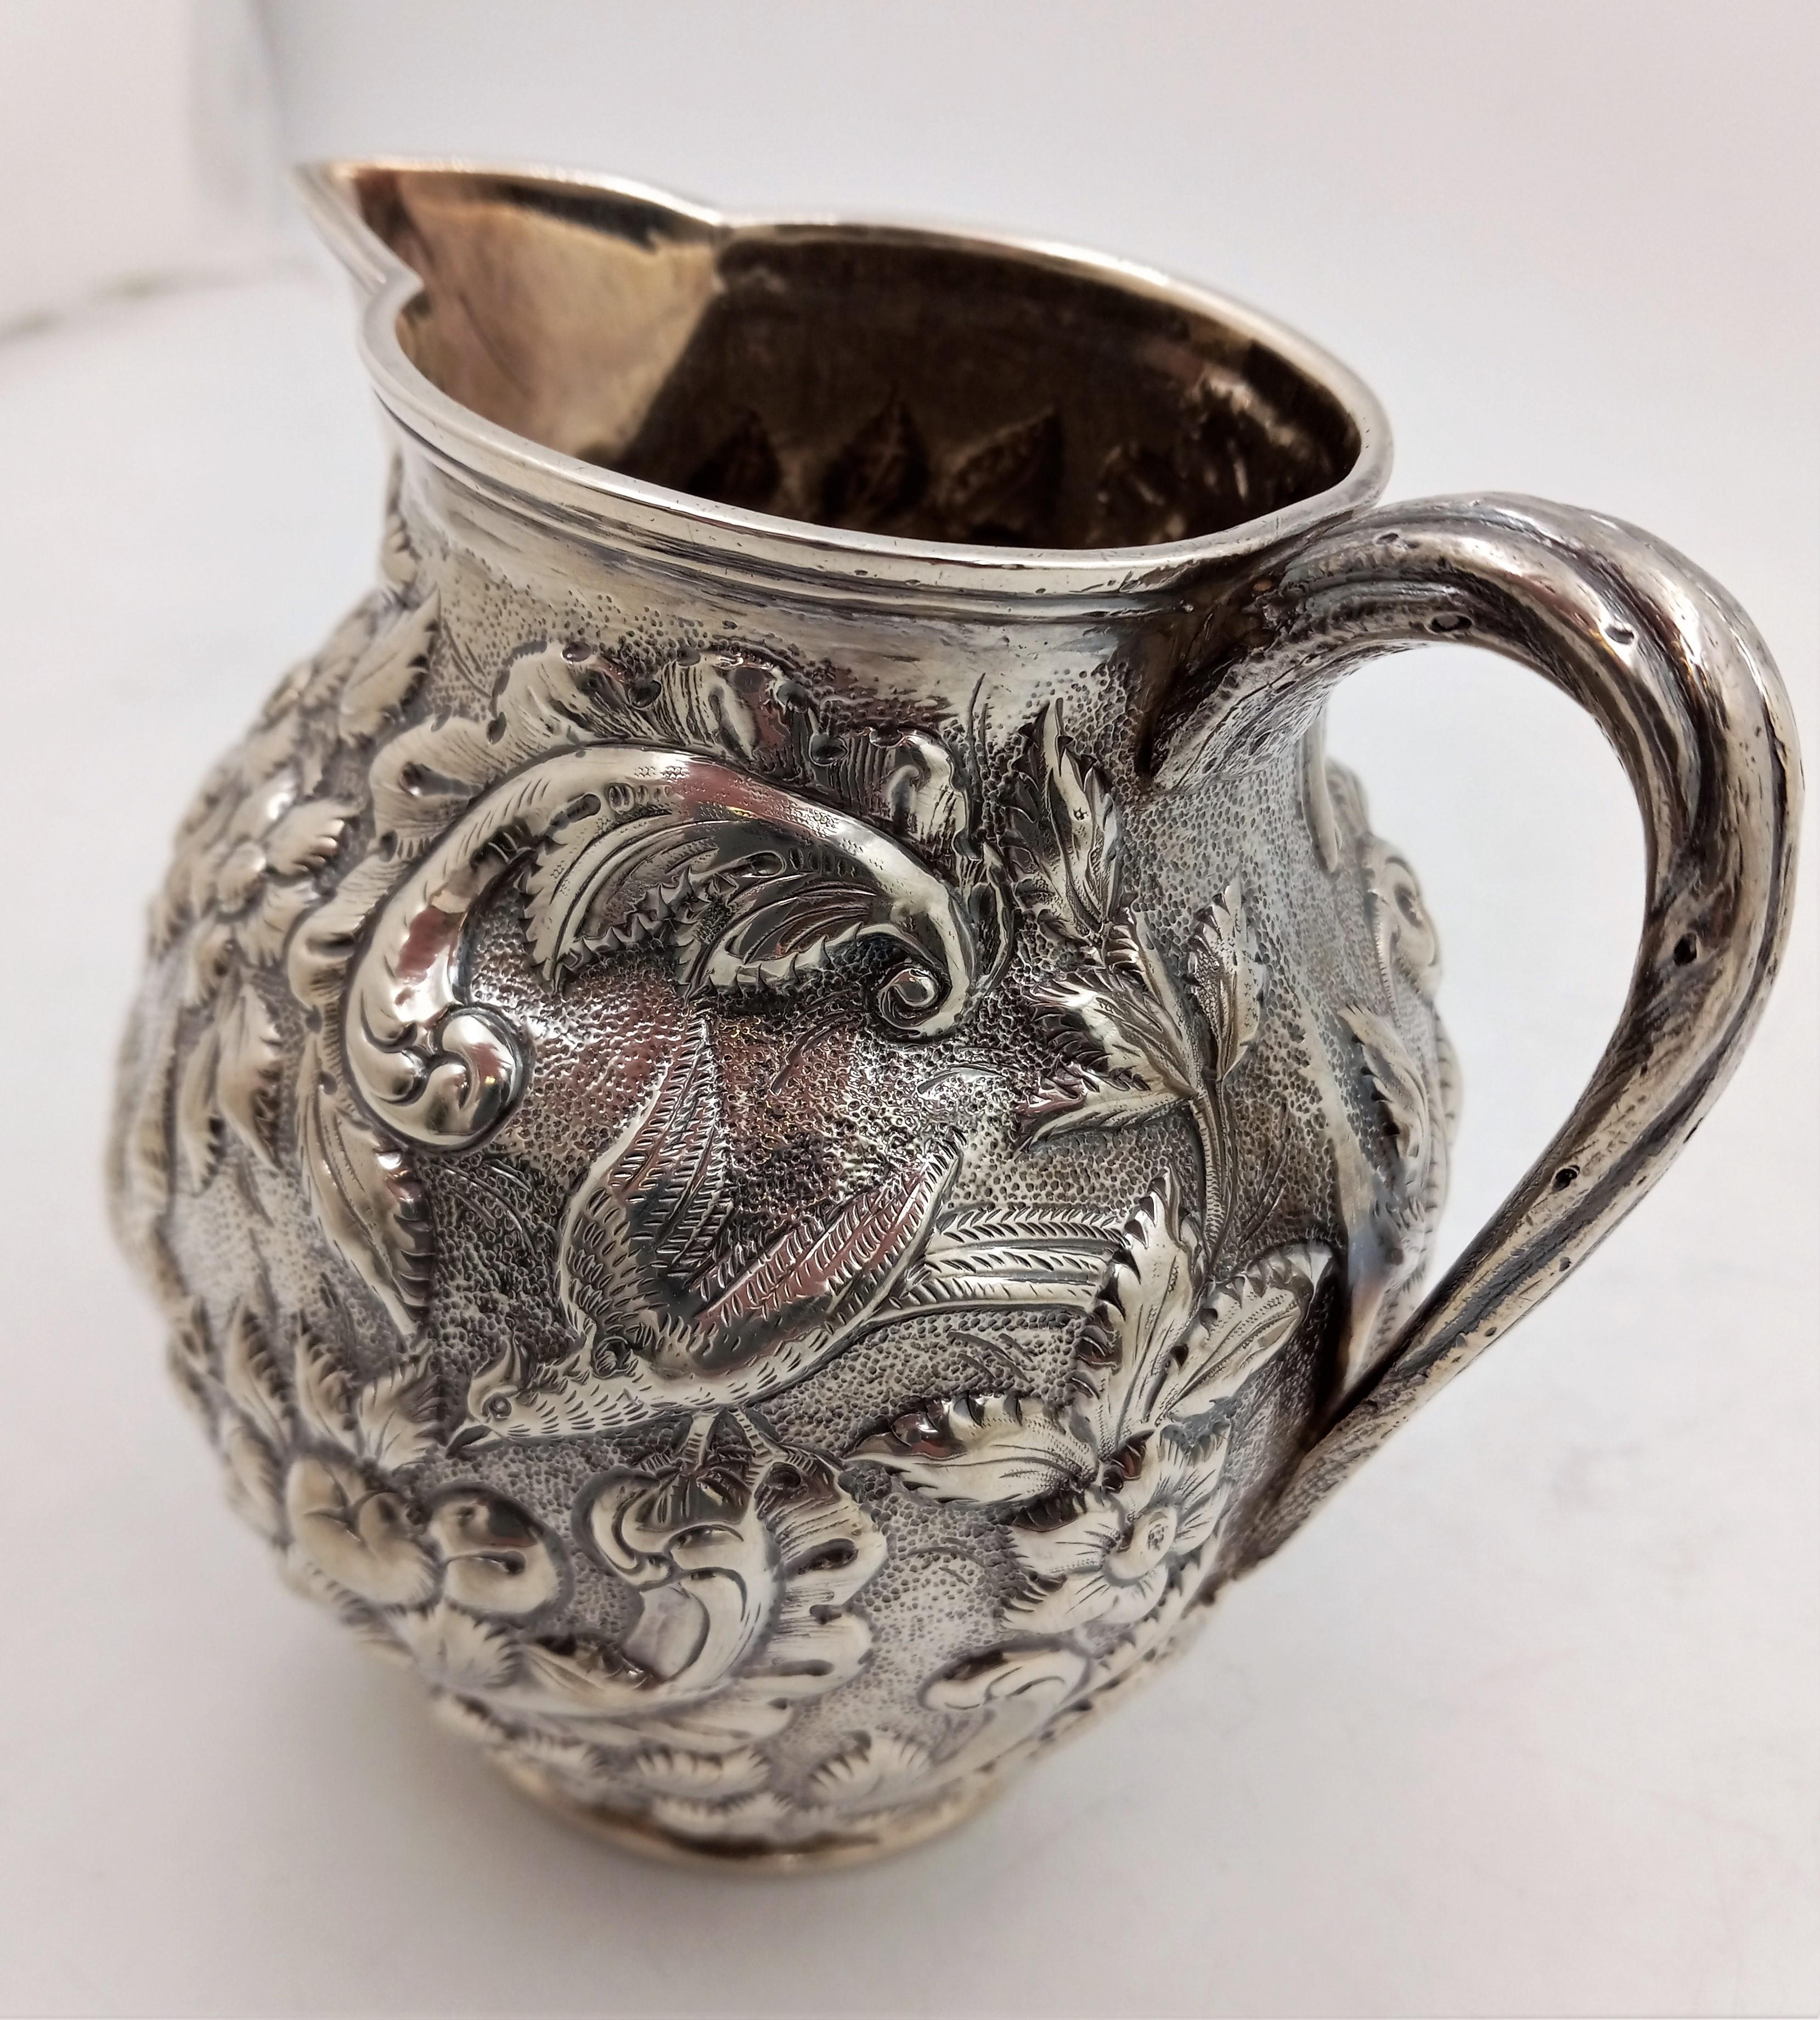 Geo. W. Webb & Co. hand-chased coin silver Aesthetic repousse pitcher, circa 1875--exquisitely detailed with flowers, birds, and fruits with a vined handle. This pitcher stands at 6